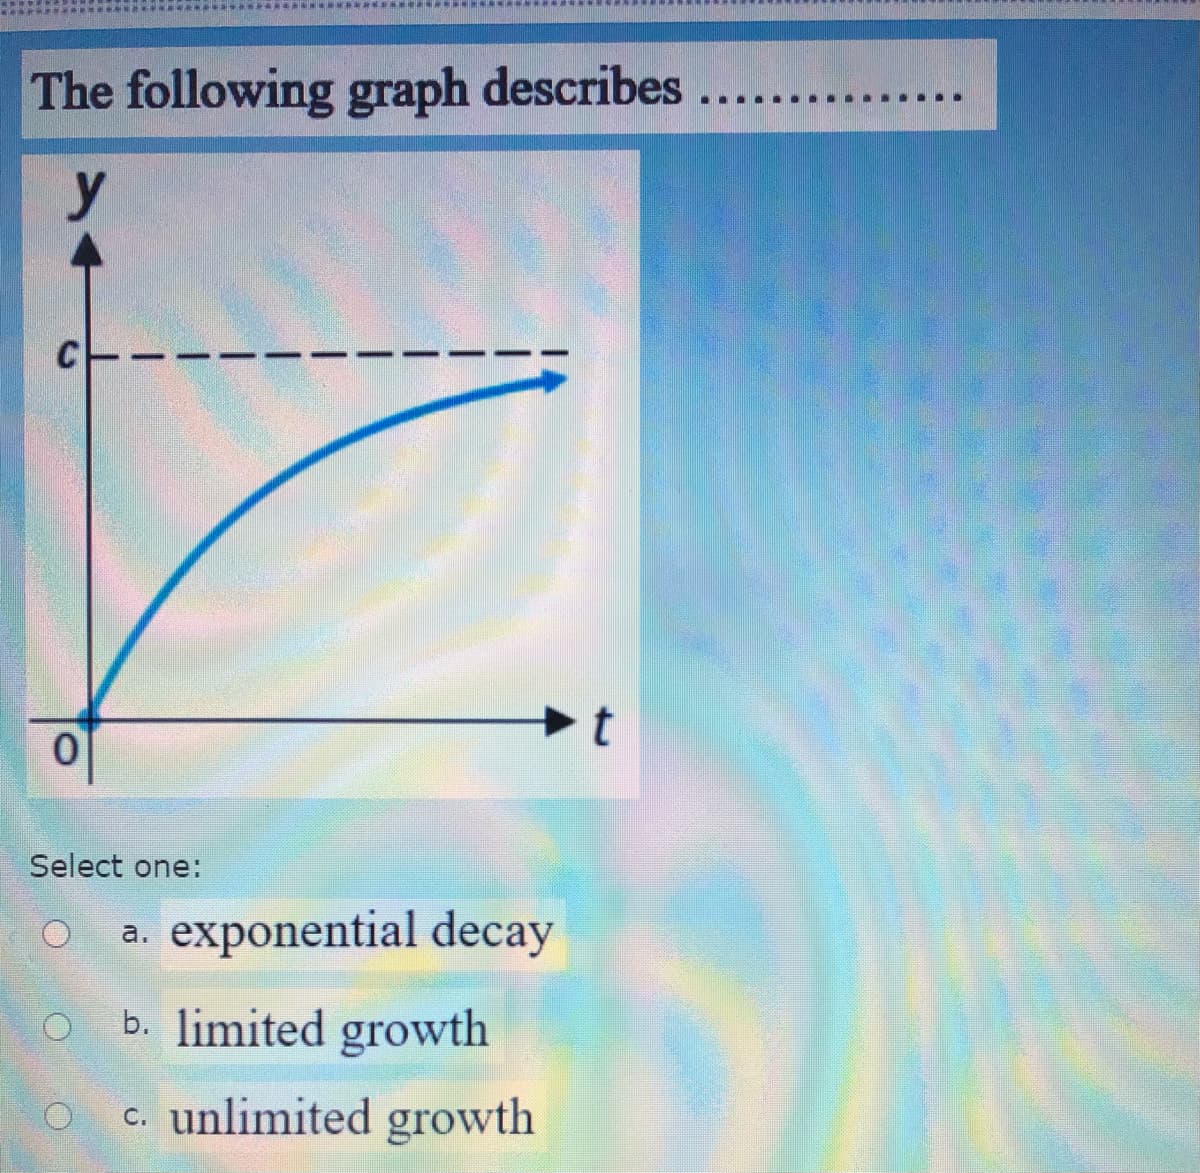 The following graph describes ...
y
Select one:
a. exponential decay
b. limited growth
c. unlimited growth
